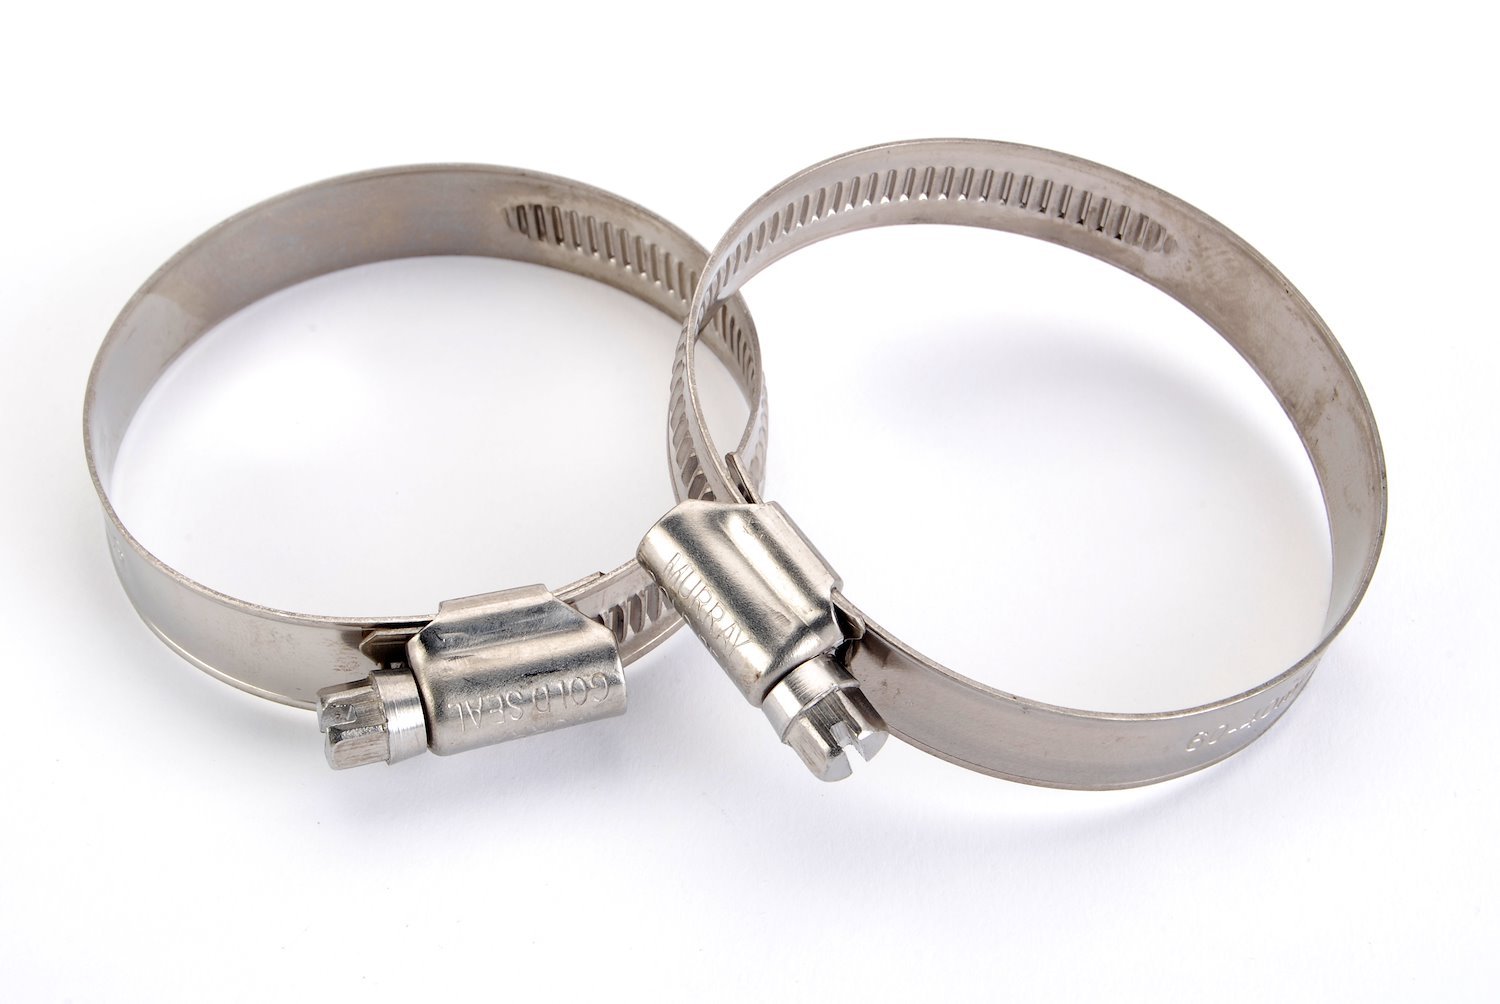 Stainless Steel Hose Clamps 1-5/8 in. to 2 3/8 in. OD